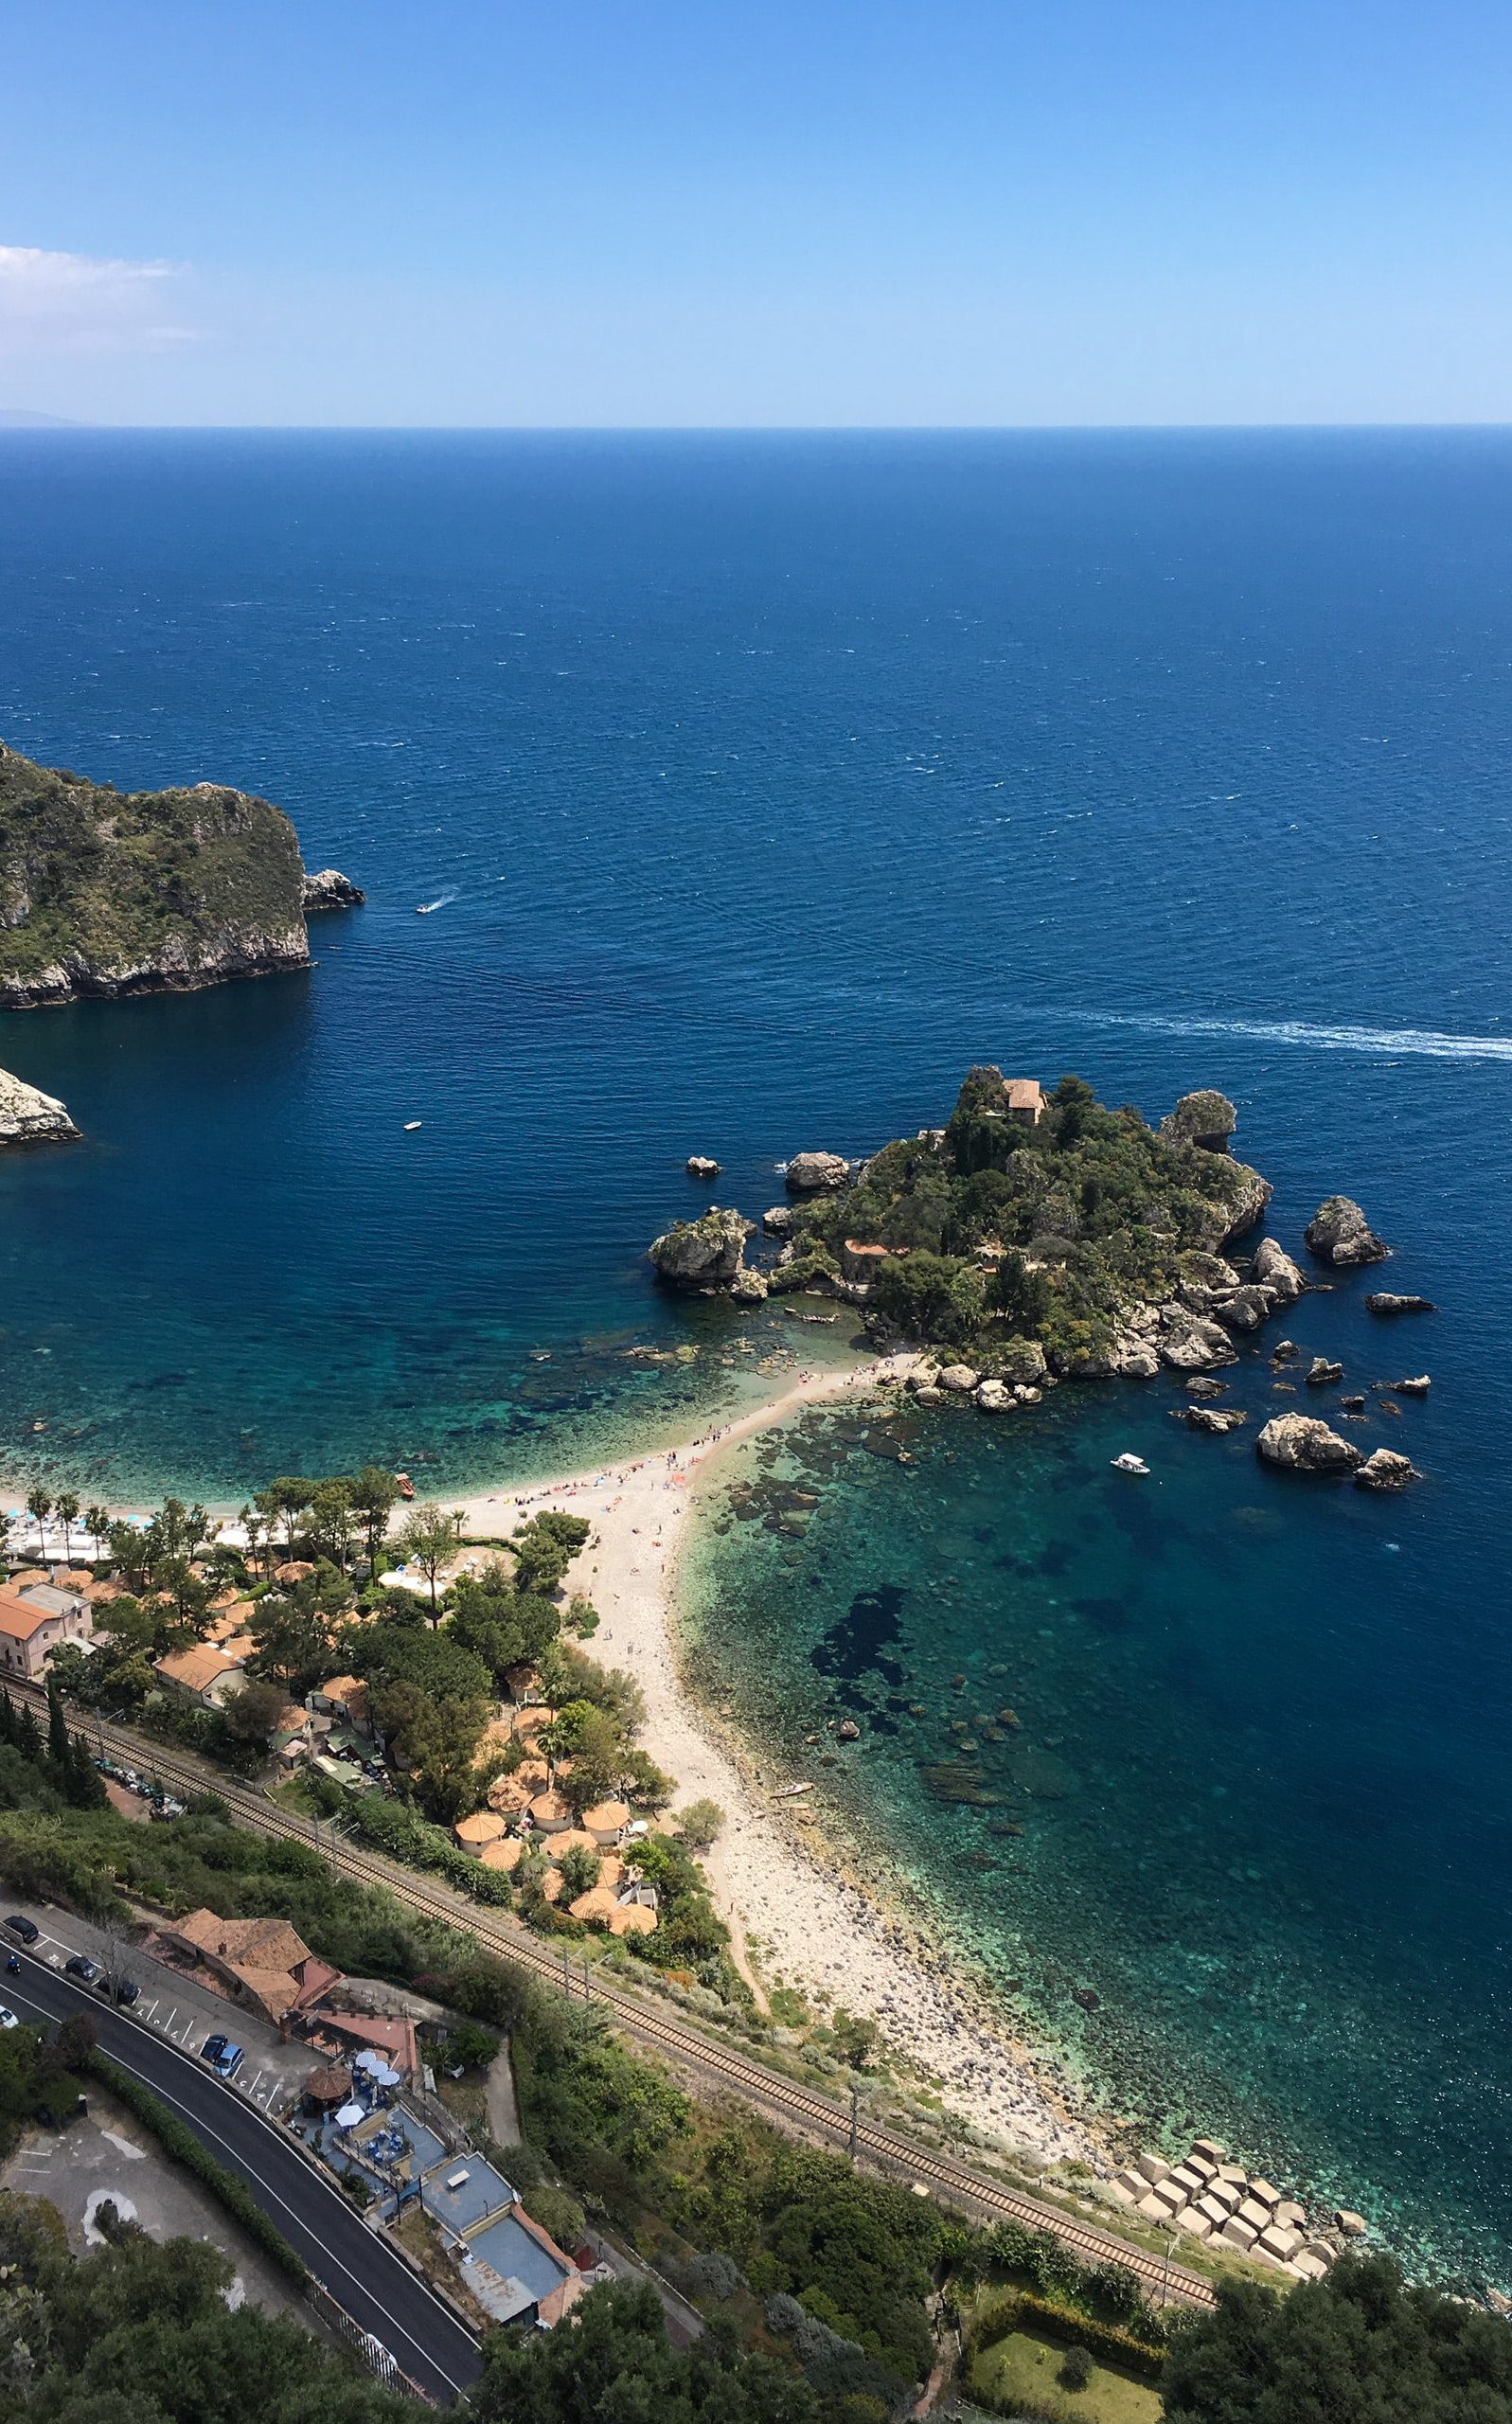 Sicily has an excellent mix of culture, beaches, and nature